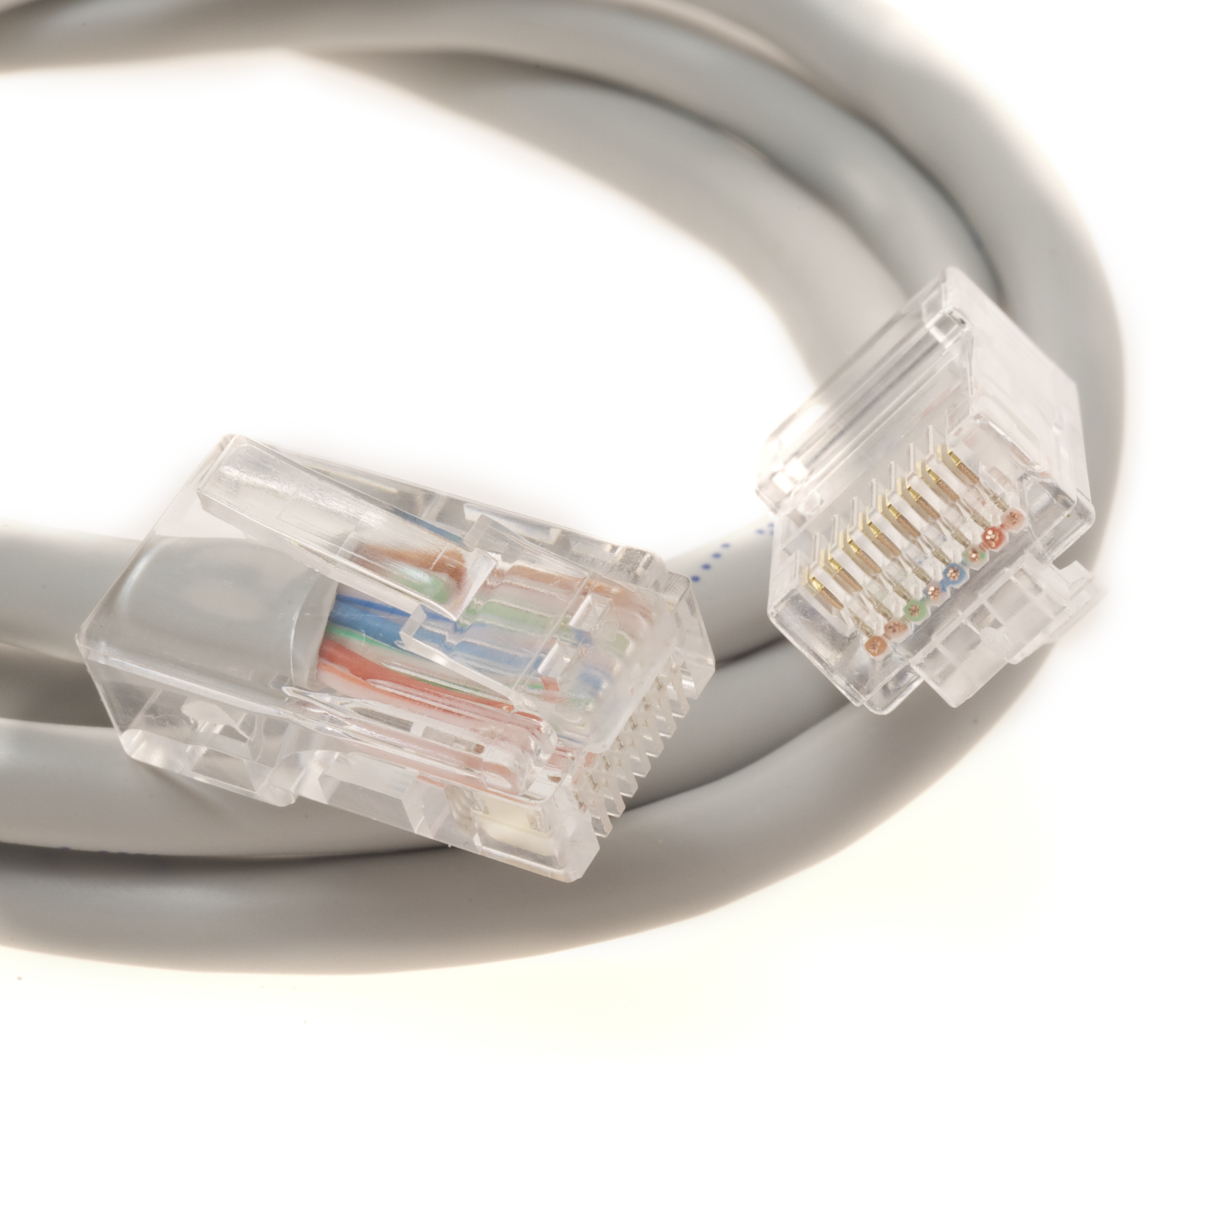 Plenum Rated Category 6 Ethernet Cables in Gray